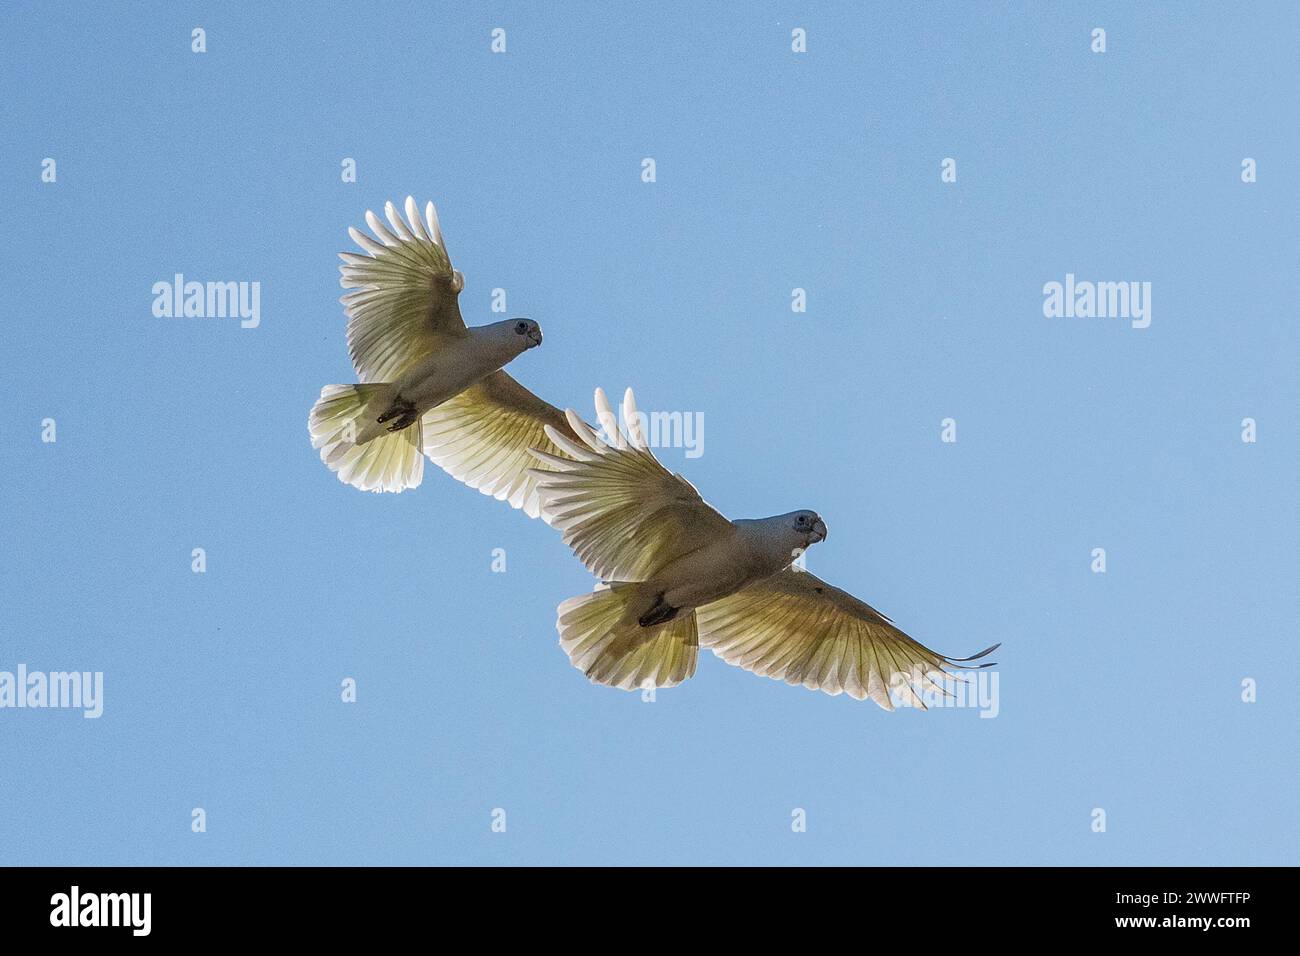 A pair of Little Corellas (Cacatua pastinator) in flight with outstretched wings, Western Australia, Australia Stock Photo